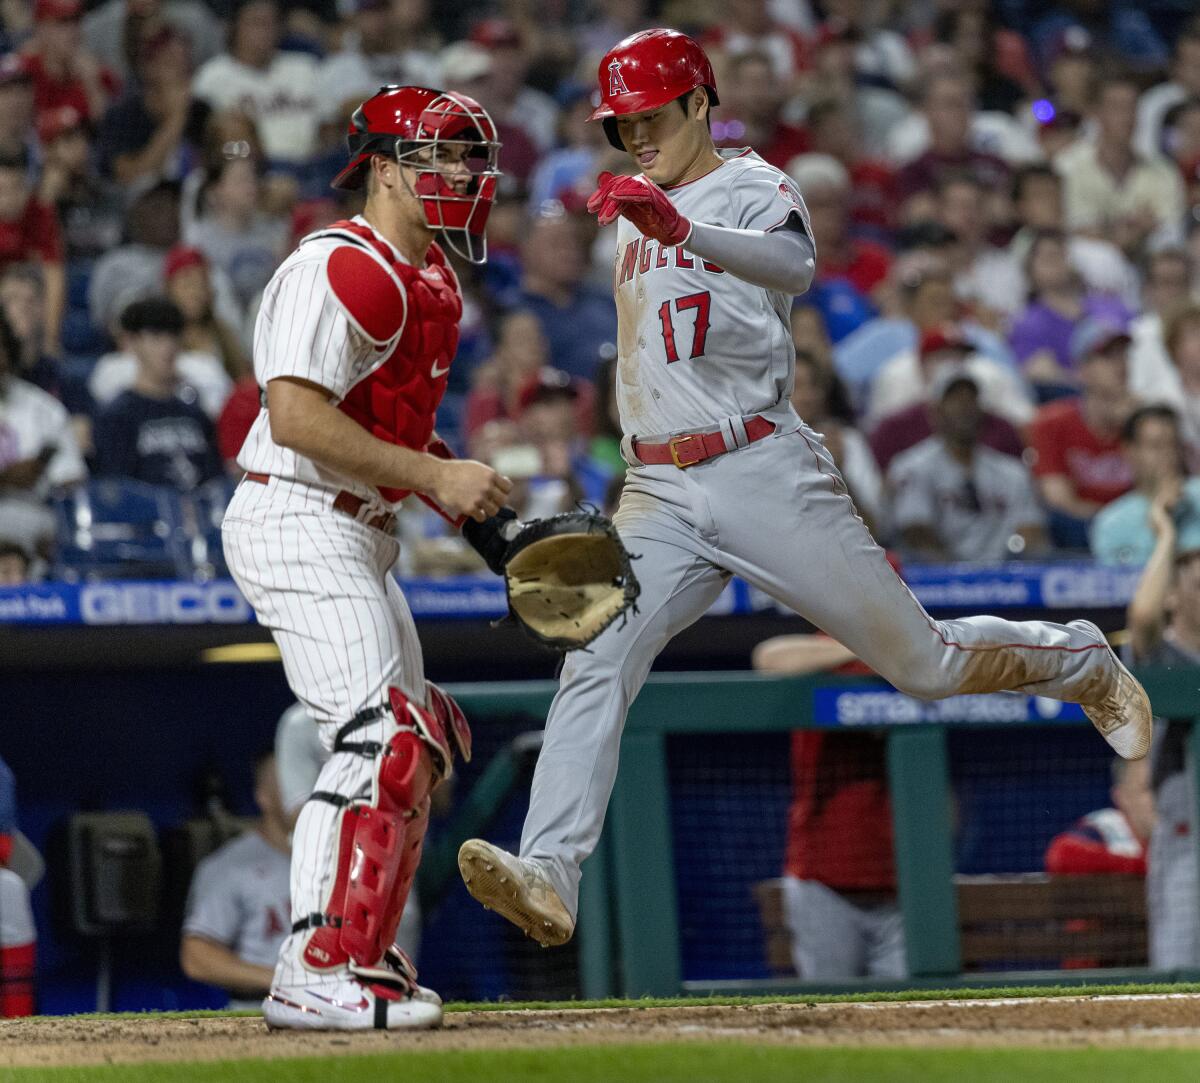 The Angels' Shohei Ohtani scores past Phillies catcher J.T. Realmuto on Jared Walsh's fifth-inning RBI double June 4, 2022.